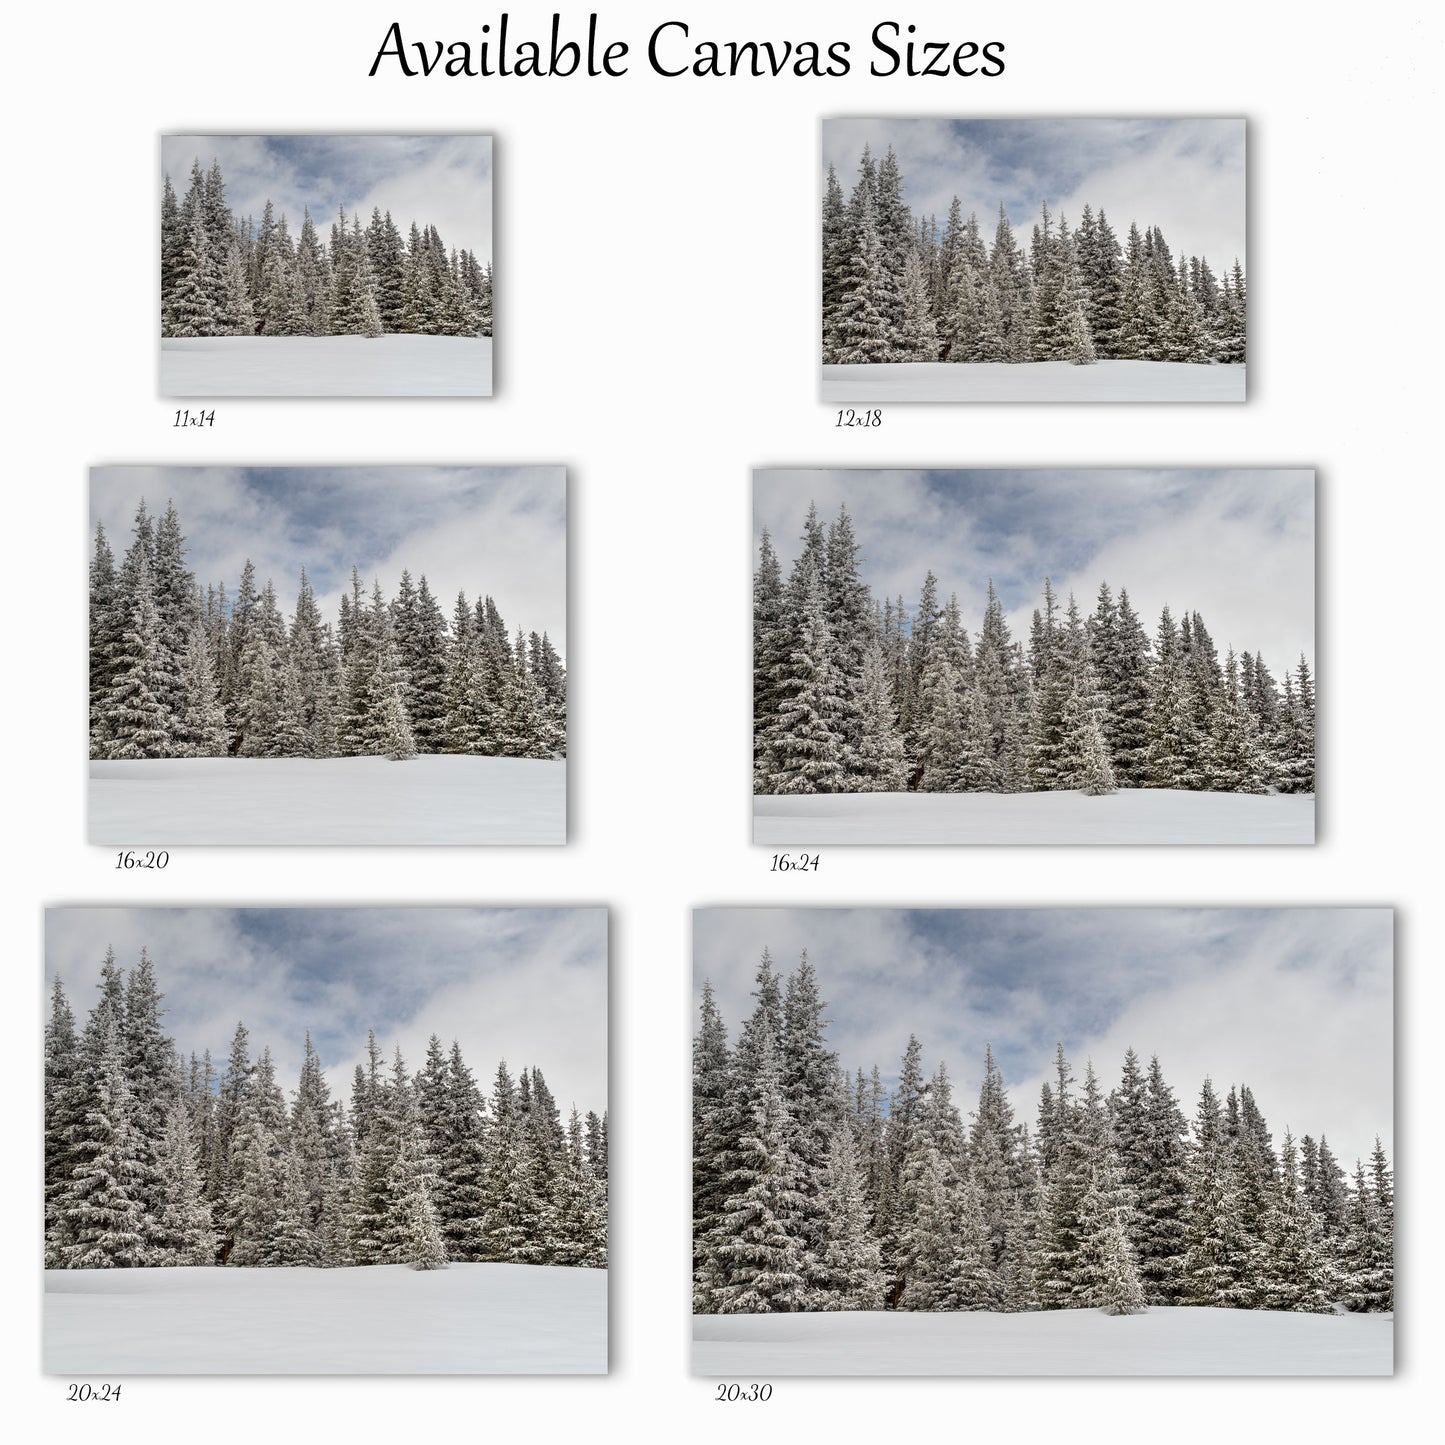 Snowy Pines Canvas